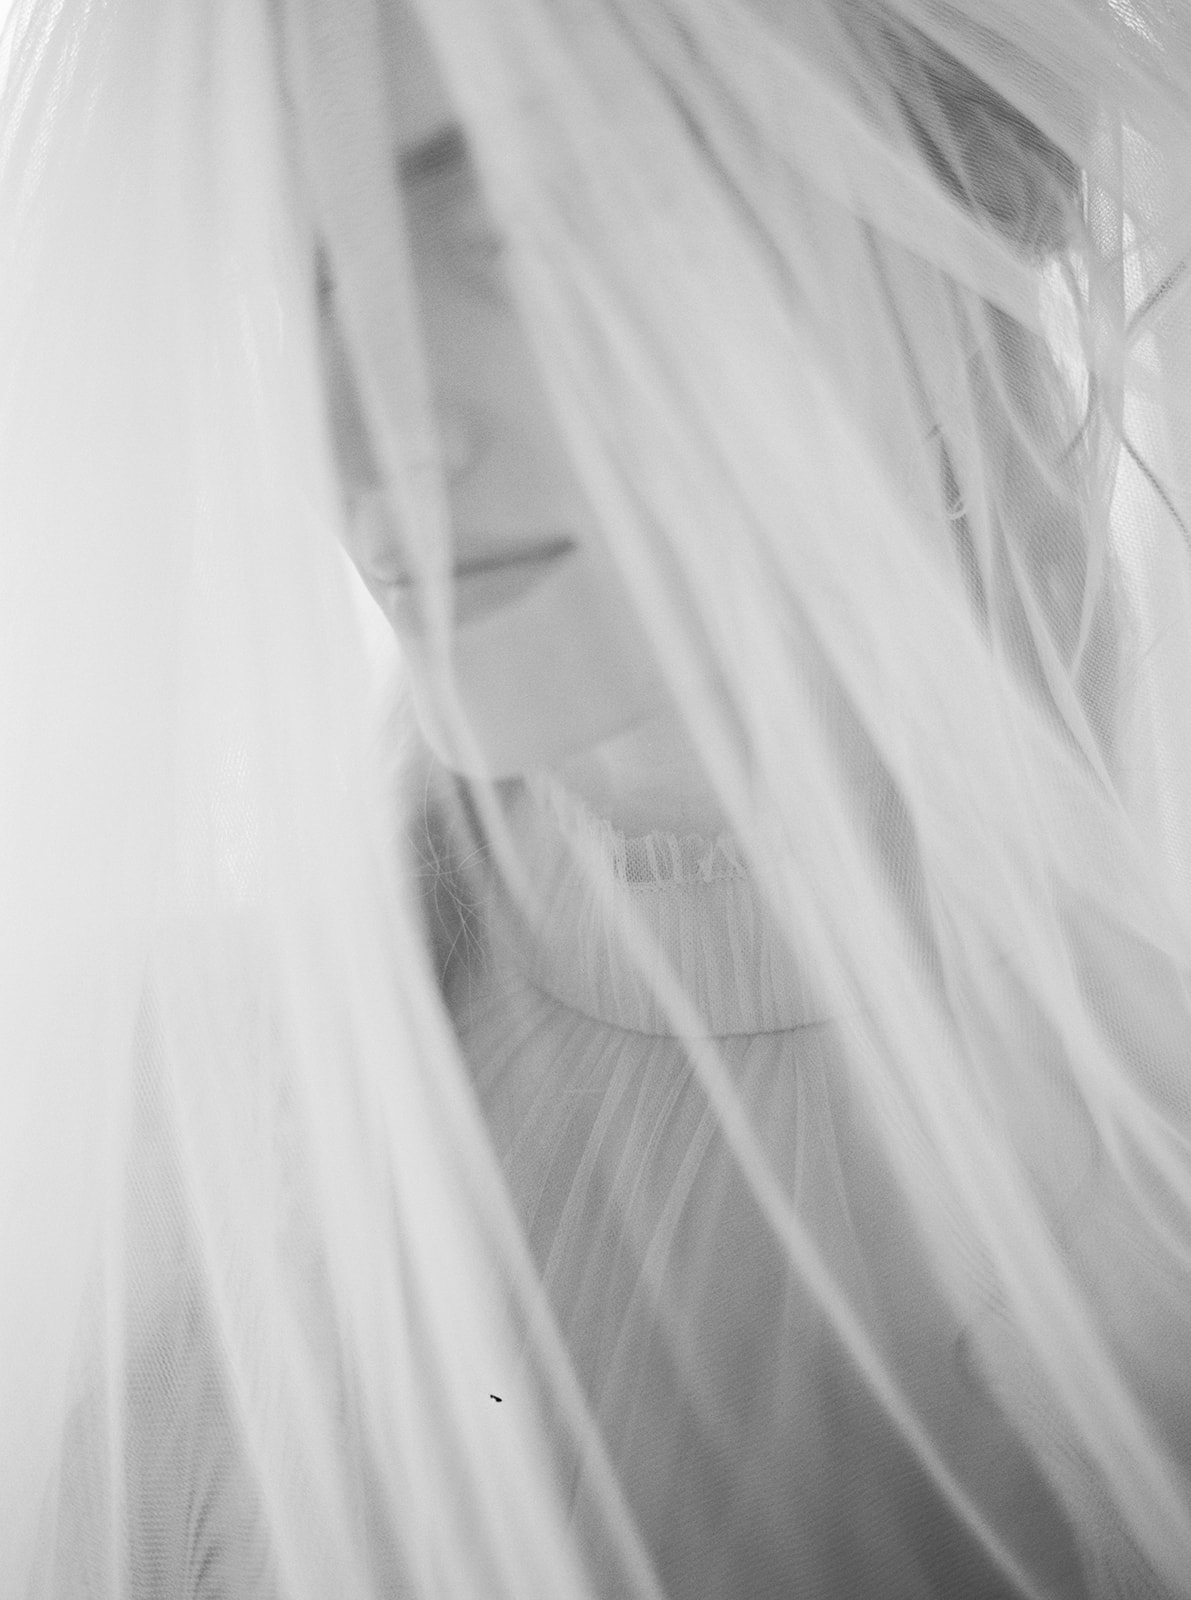 Portrait of bride behind veil photographed on black and white film